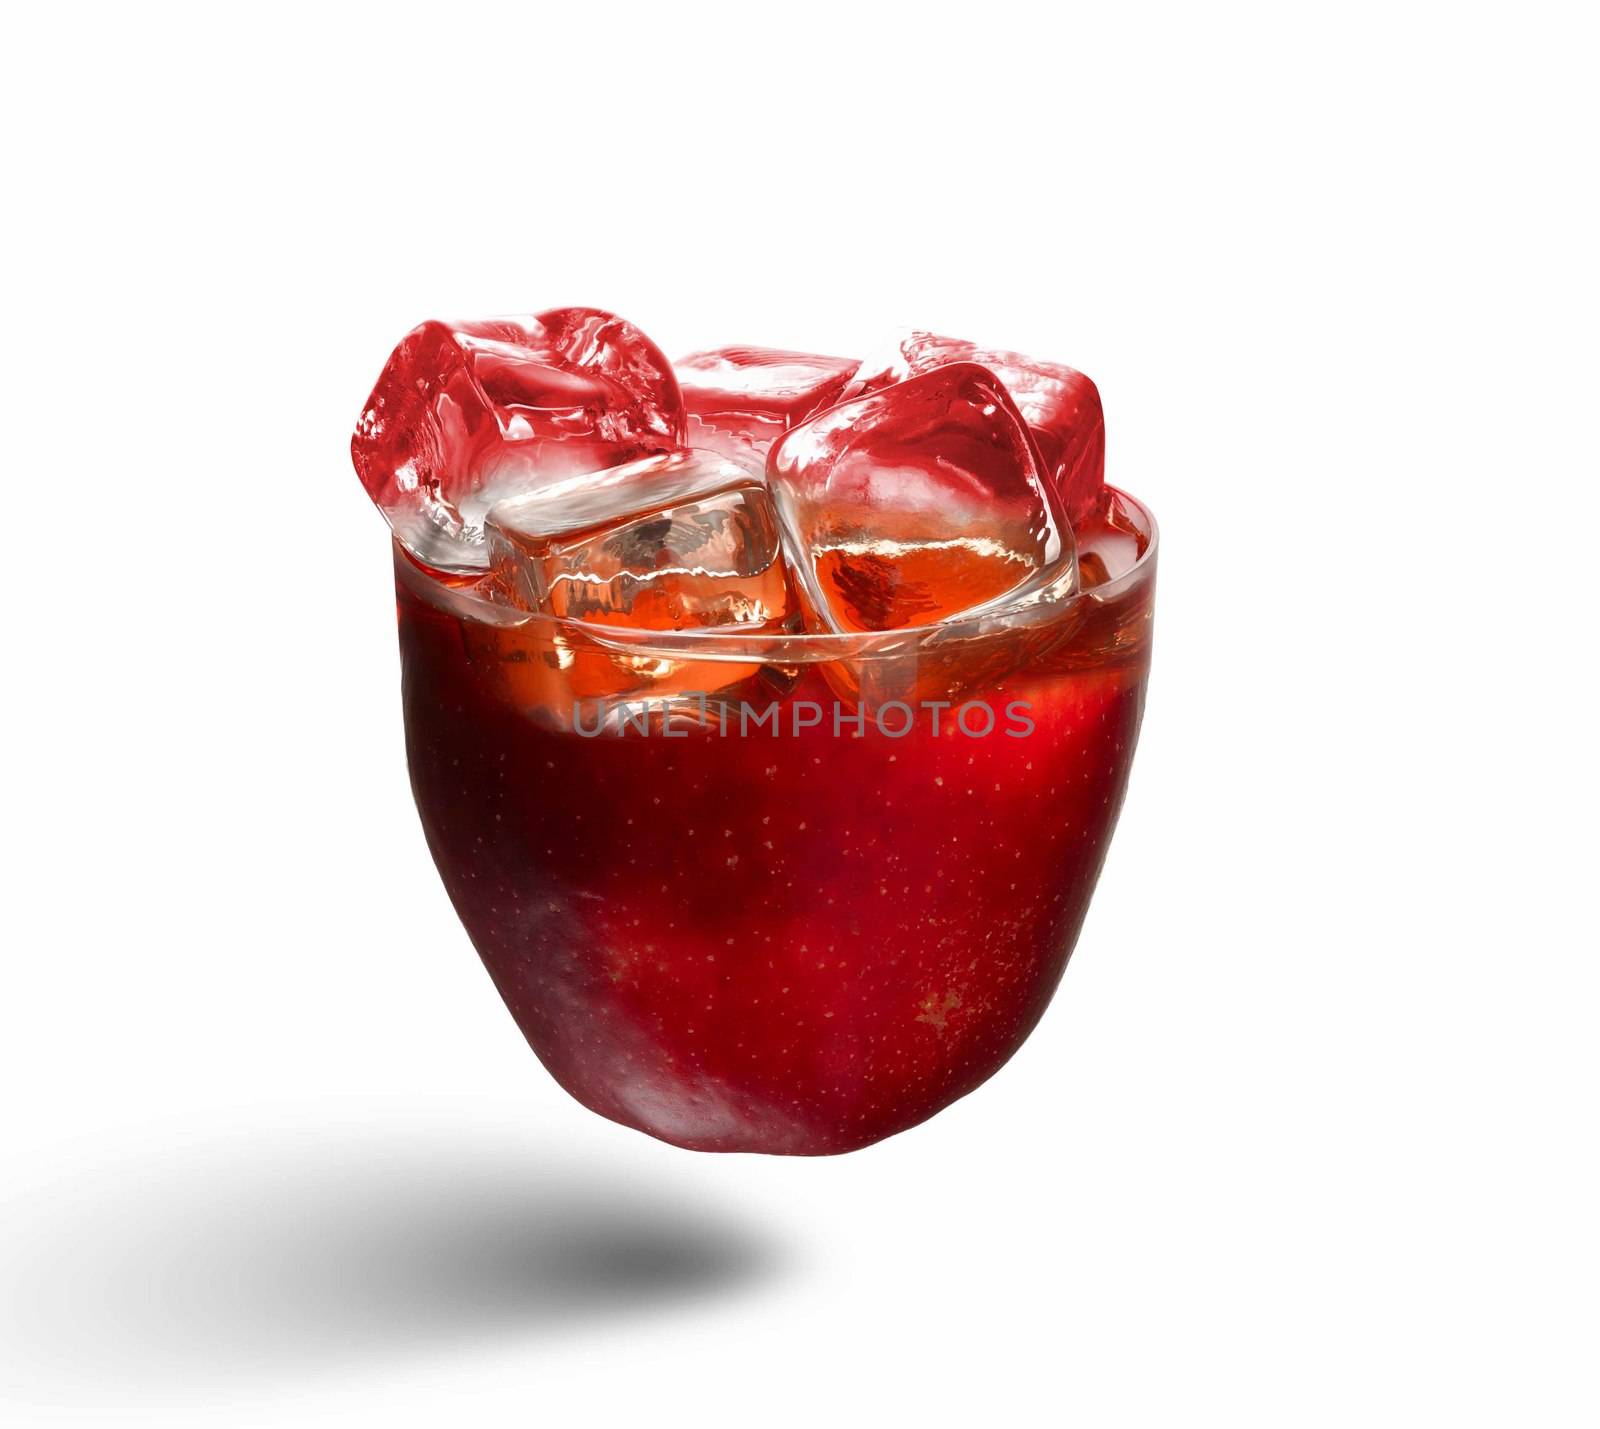 Image of juicy apple in splashes. Refreshing and healthy